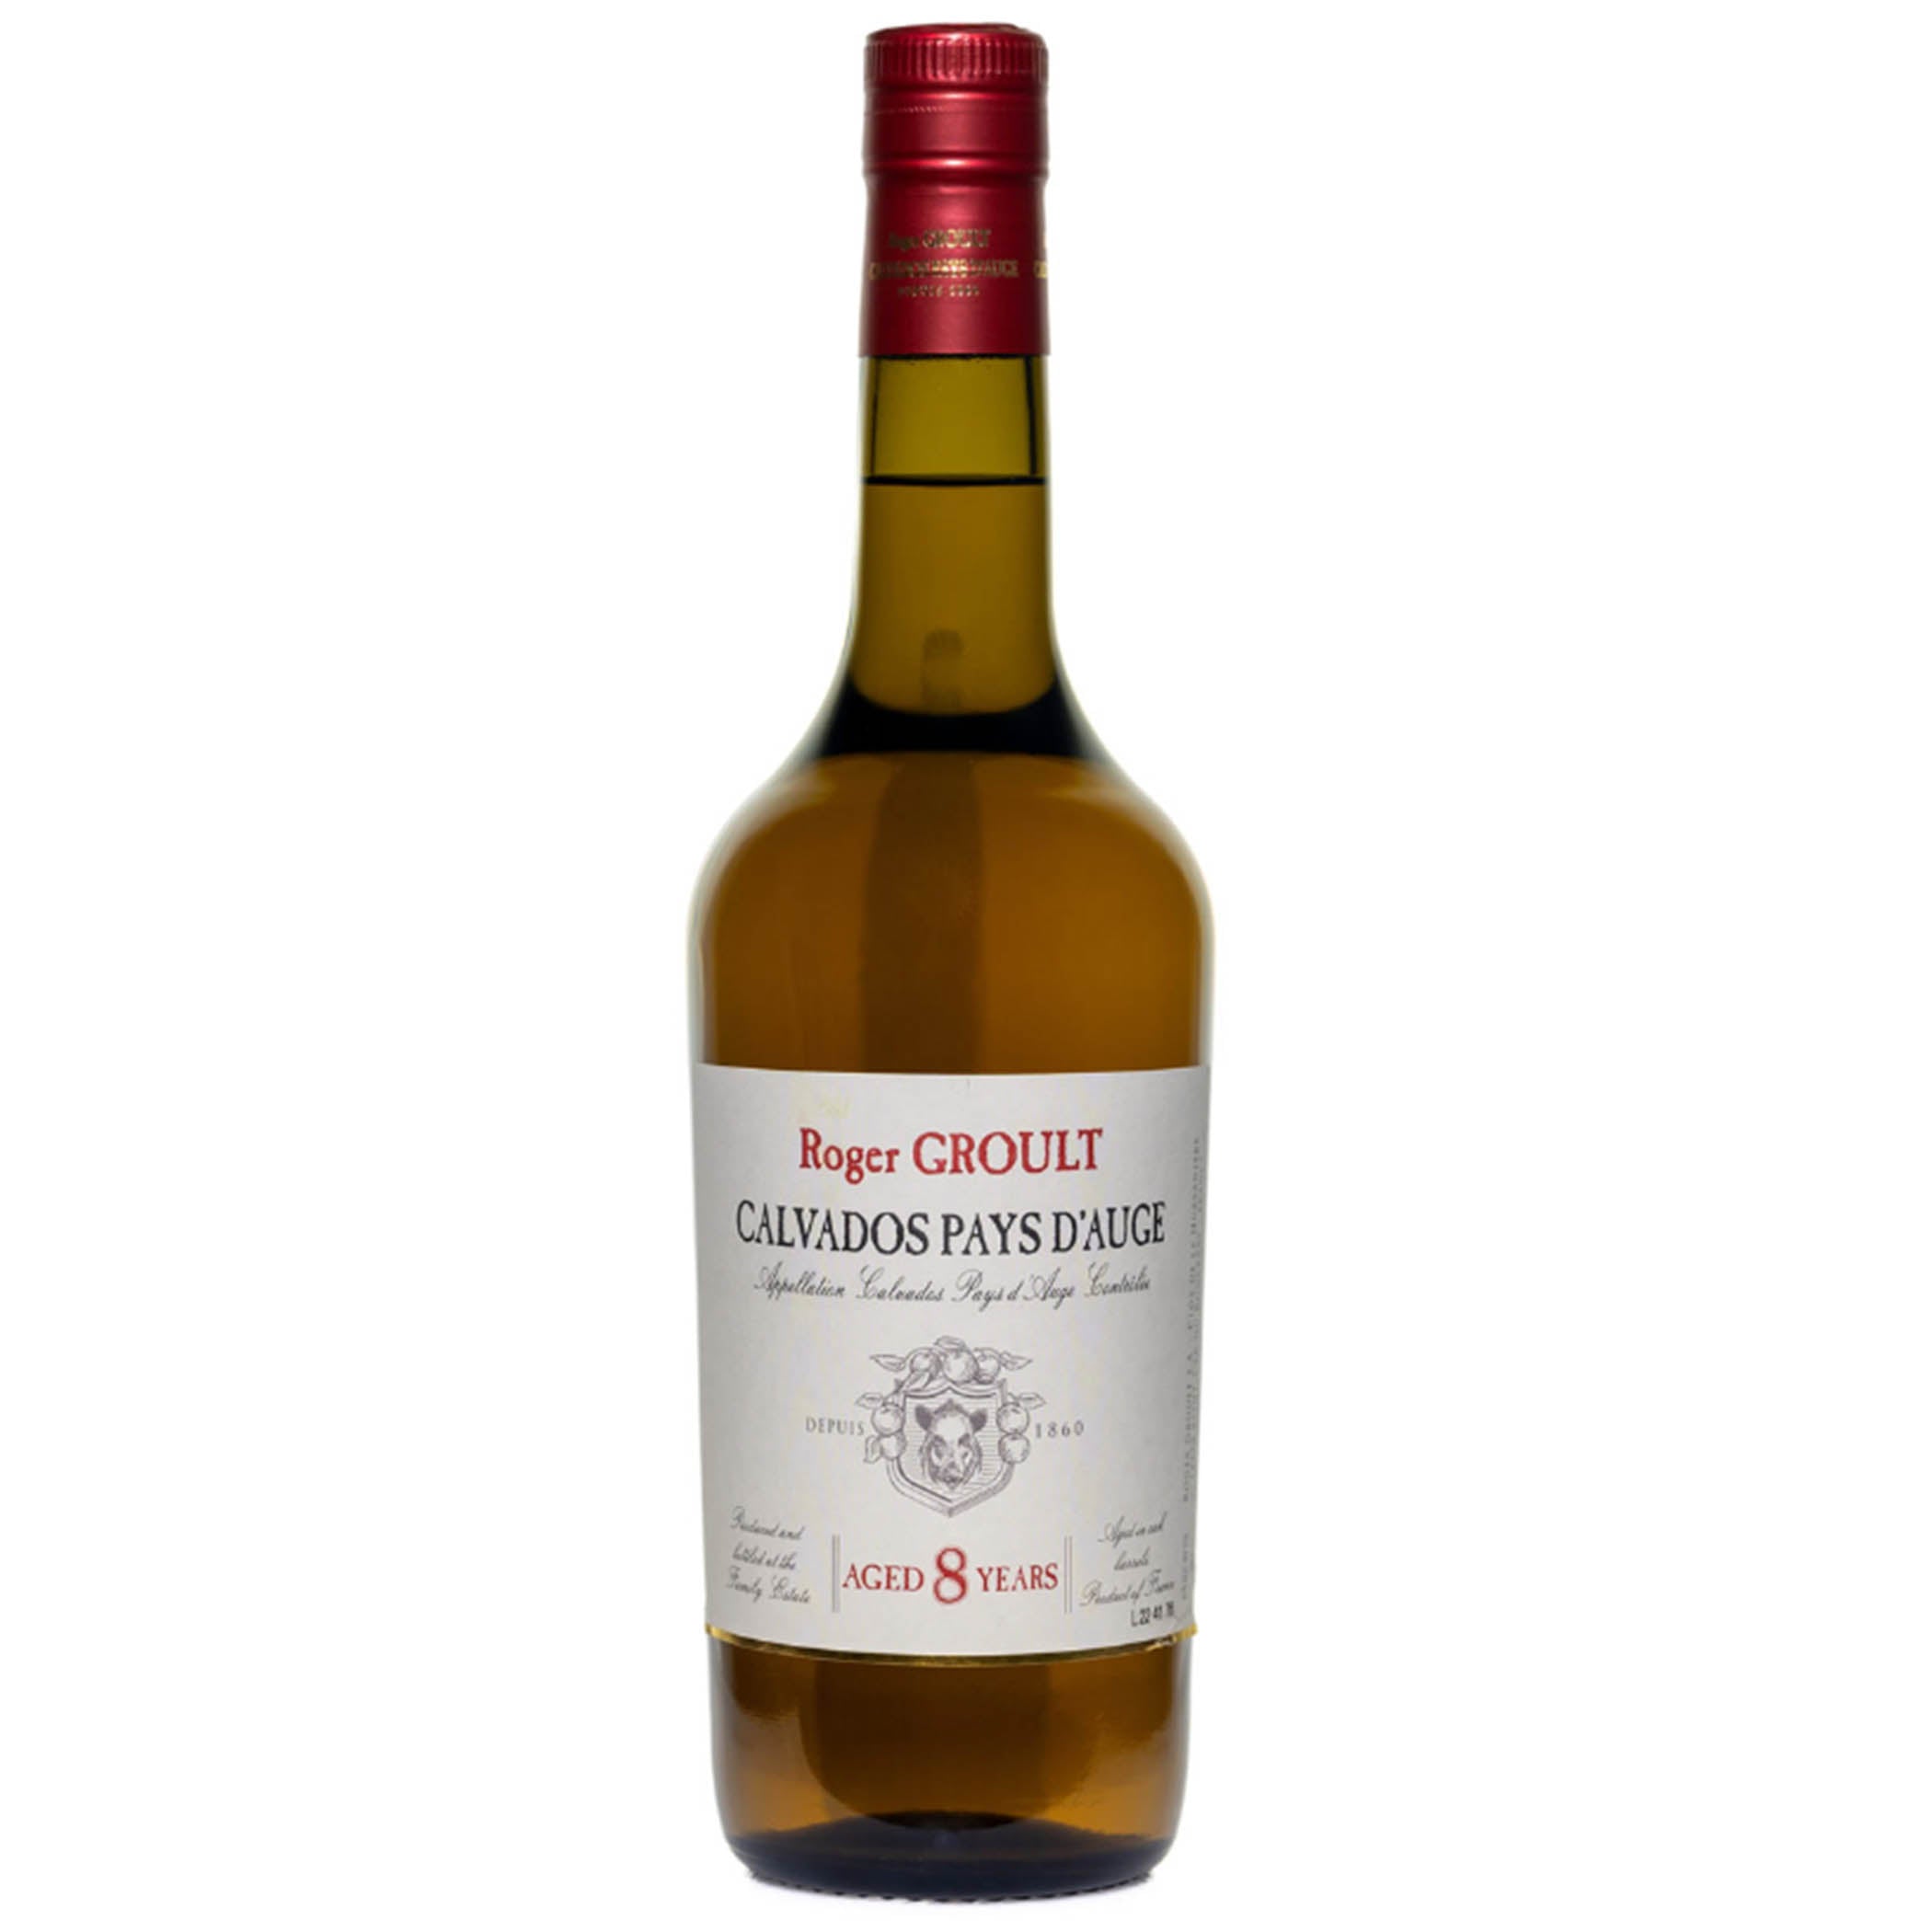 Roger Groult 8 Year Pays D'Auge Calvados